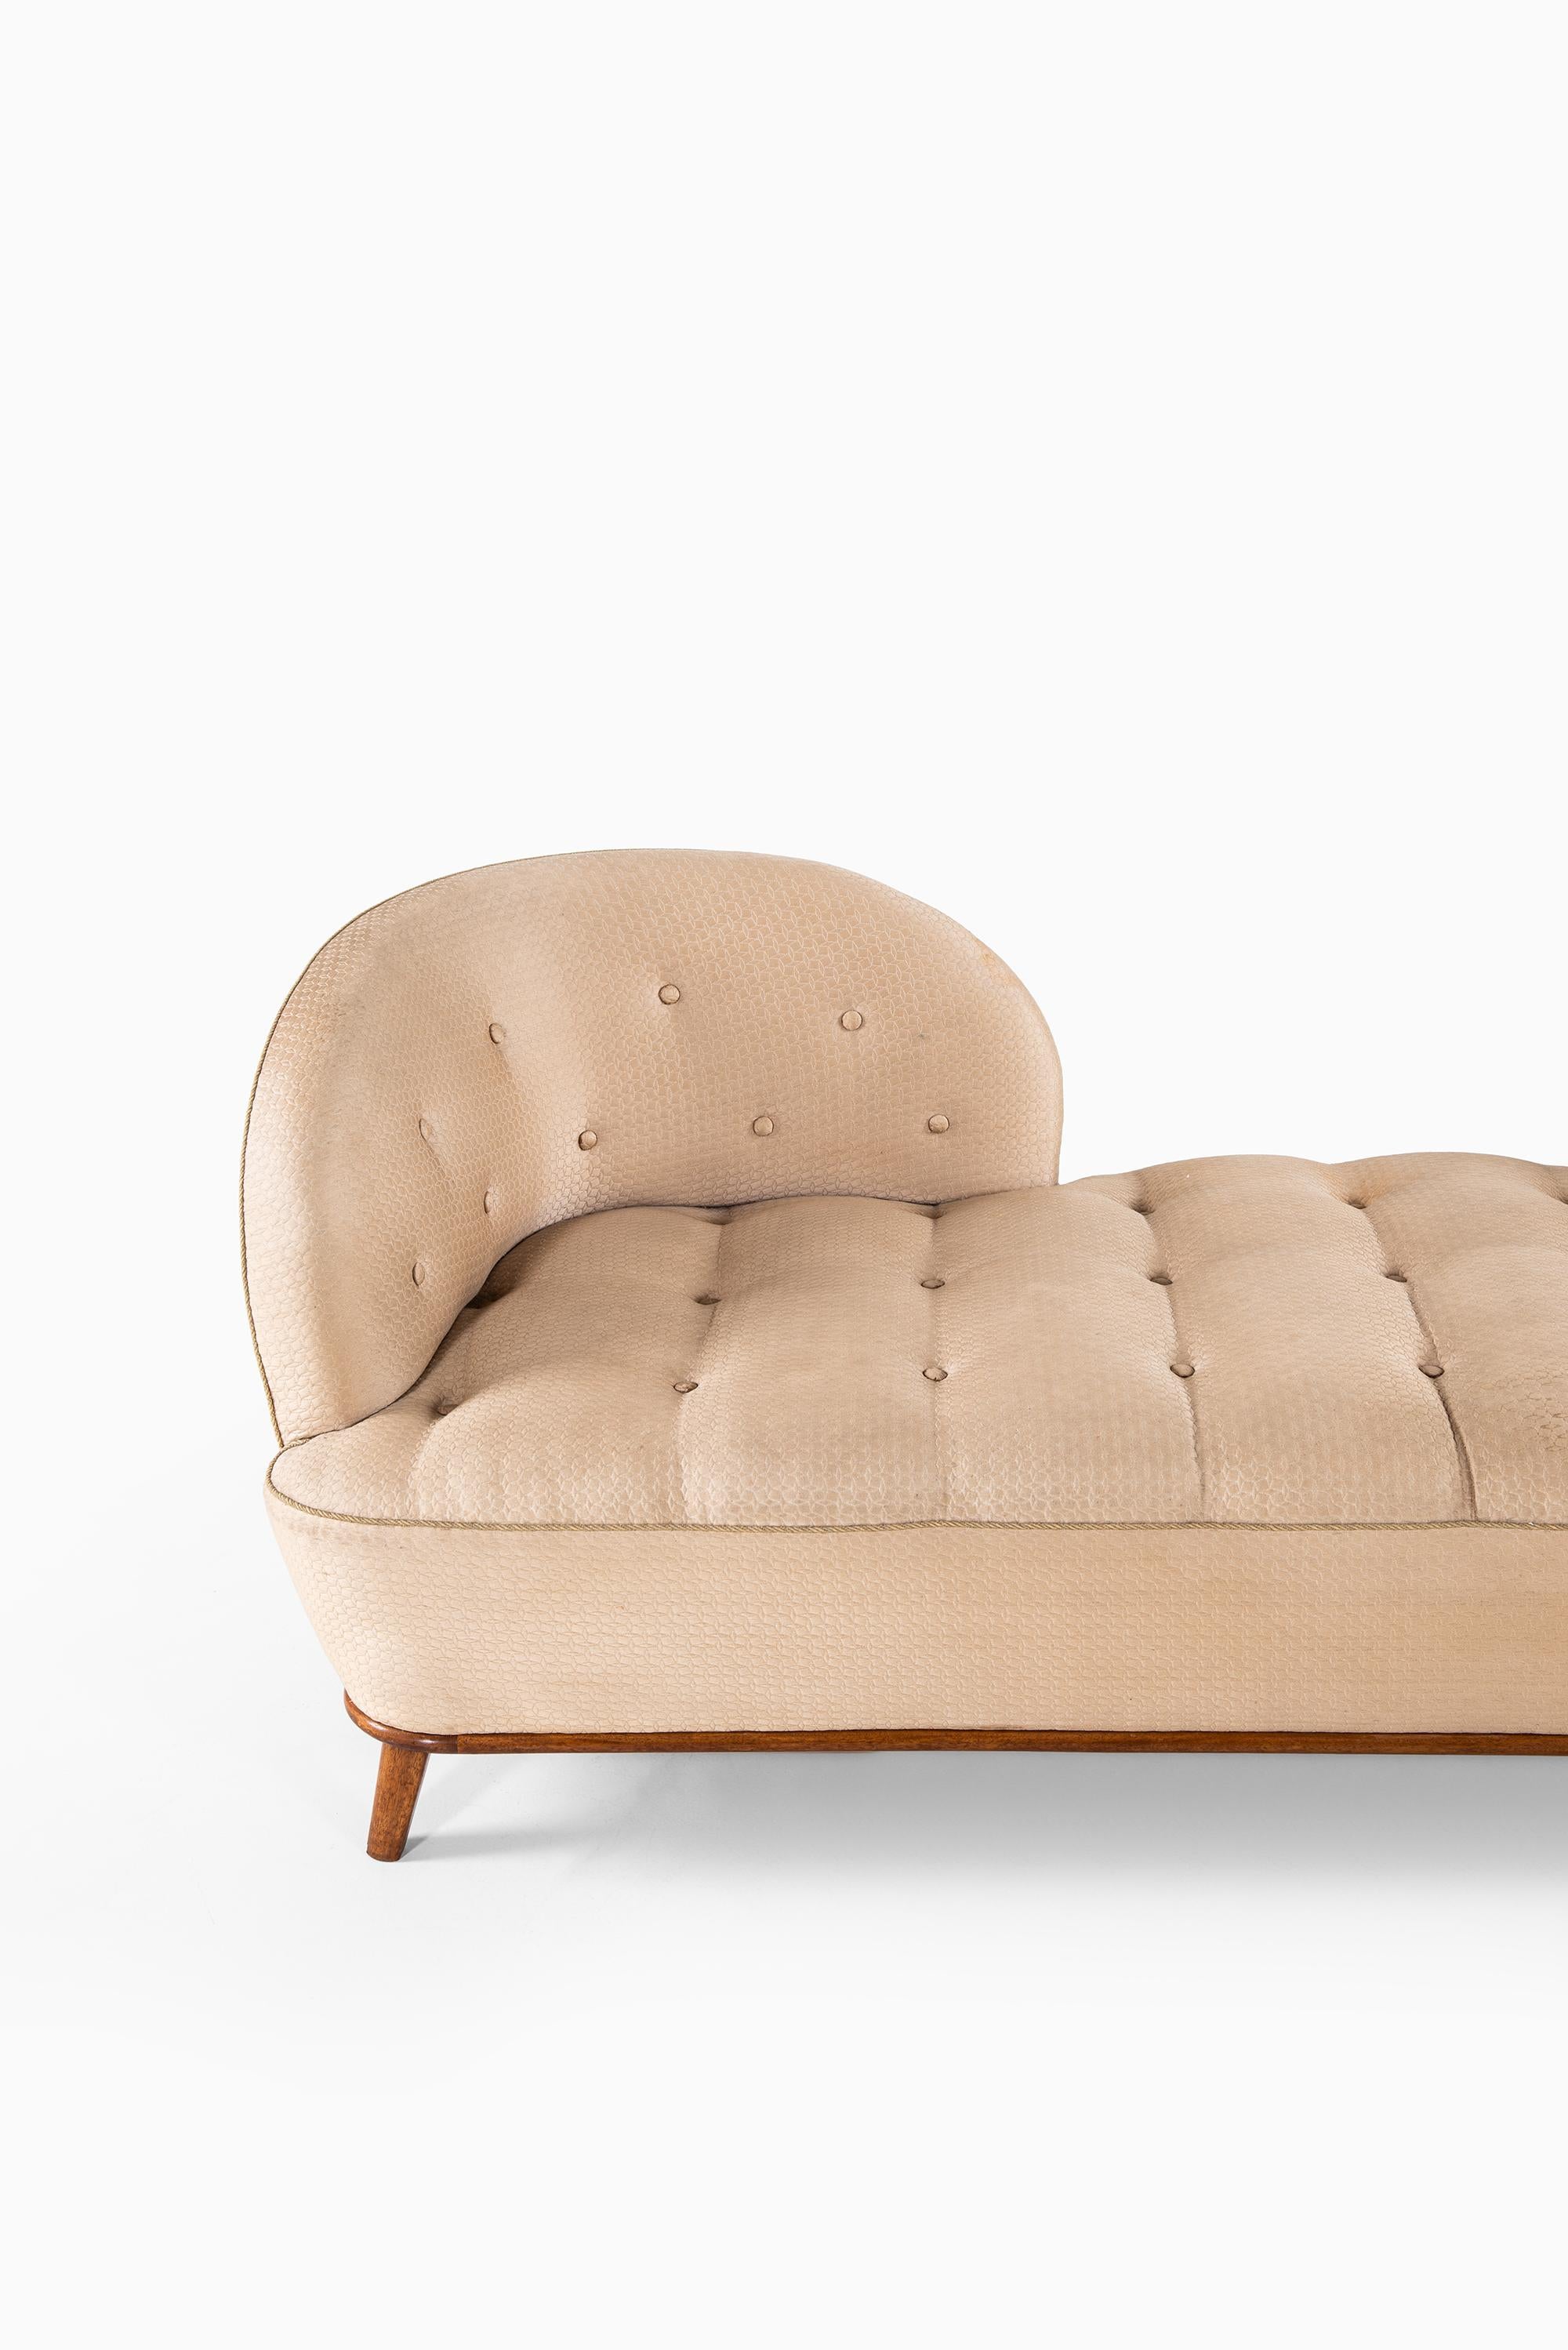 Swedish Sofa / Daybed Attributed to Tor Wolfenstein